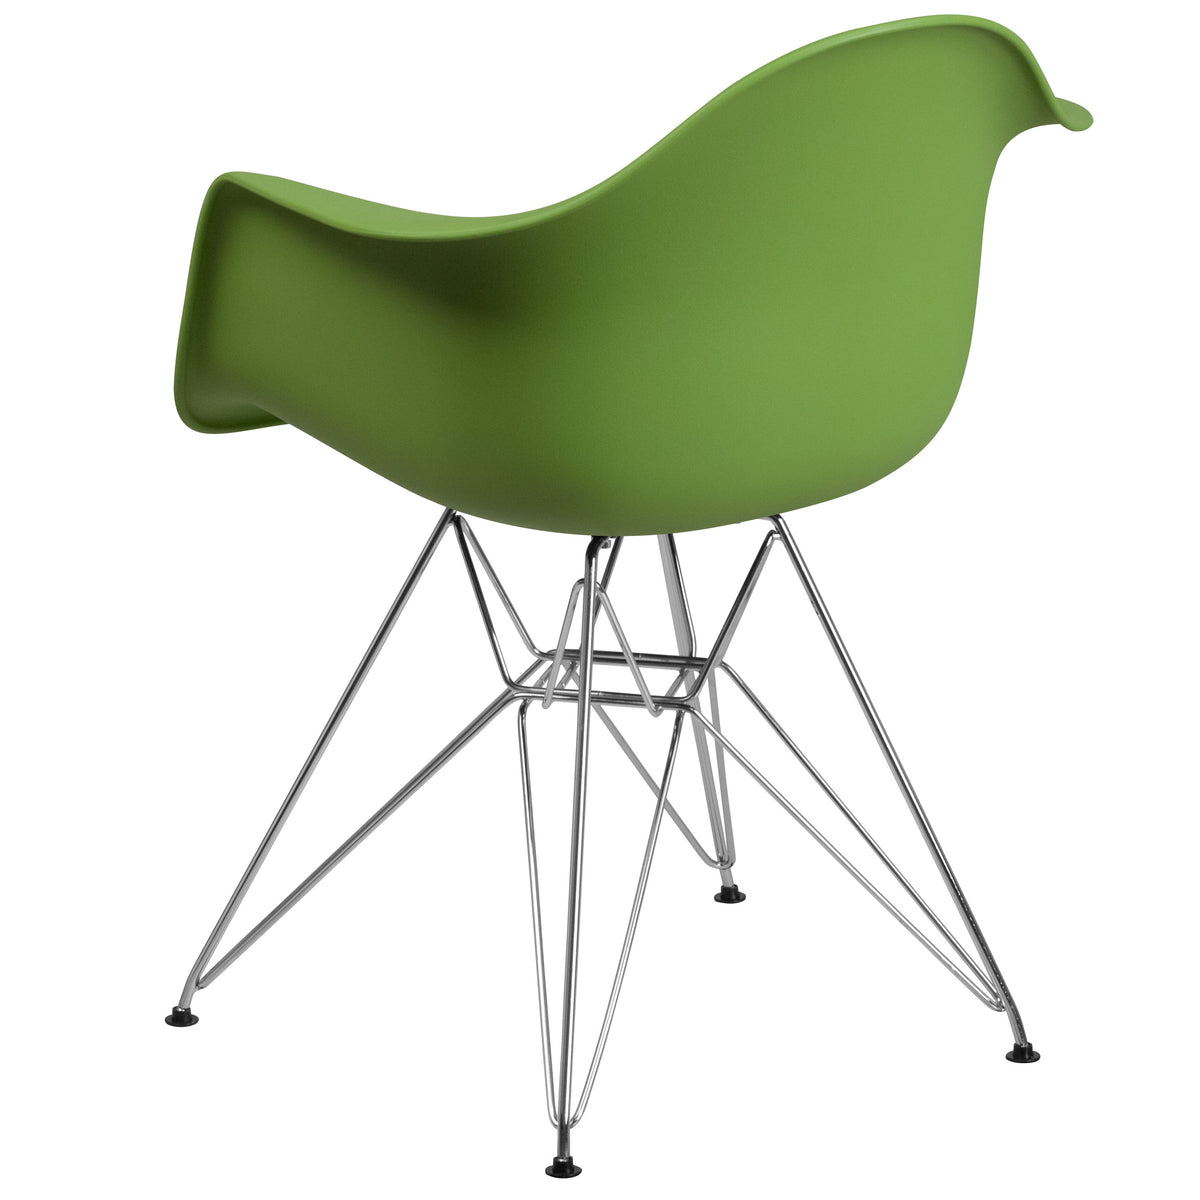 Green |#| Green Plastic Chair with Arms and Chrome Base - Accent & Side Chair